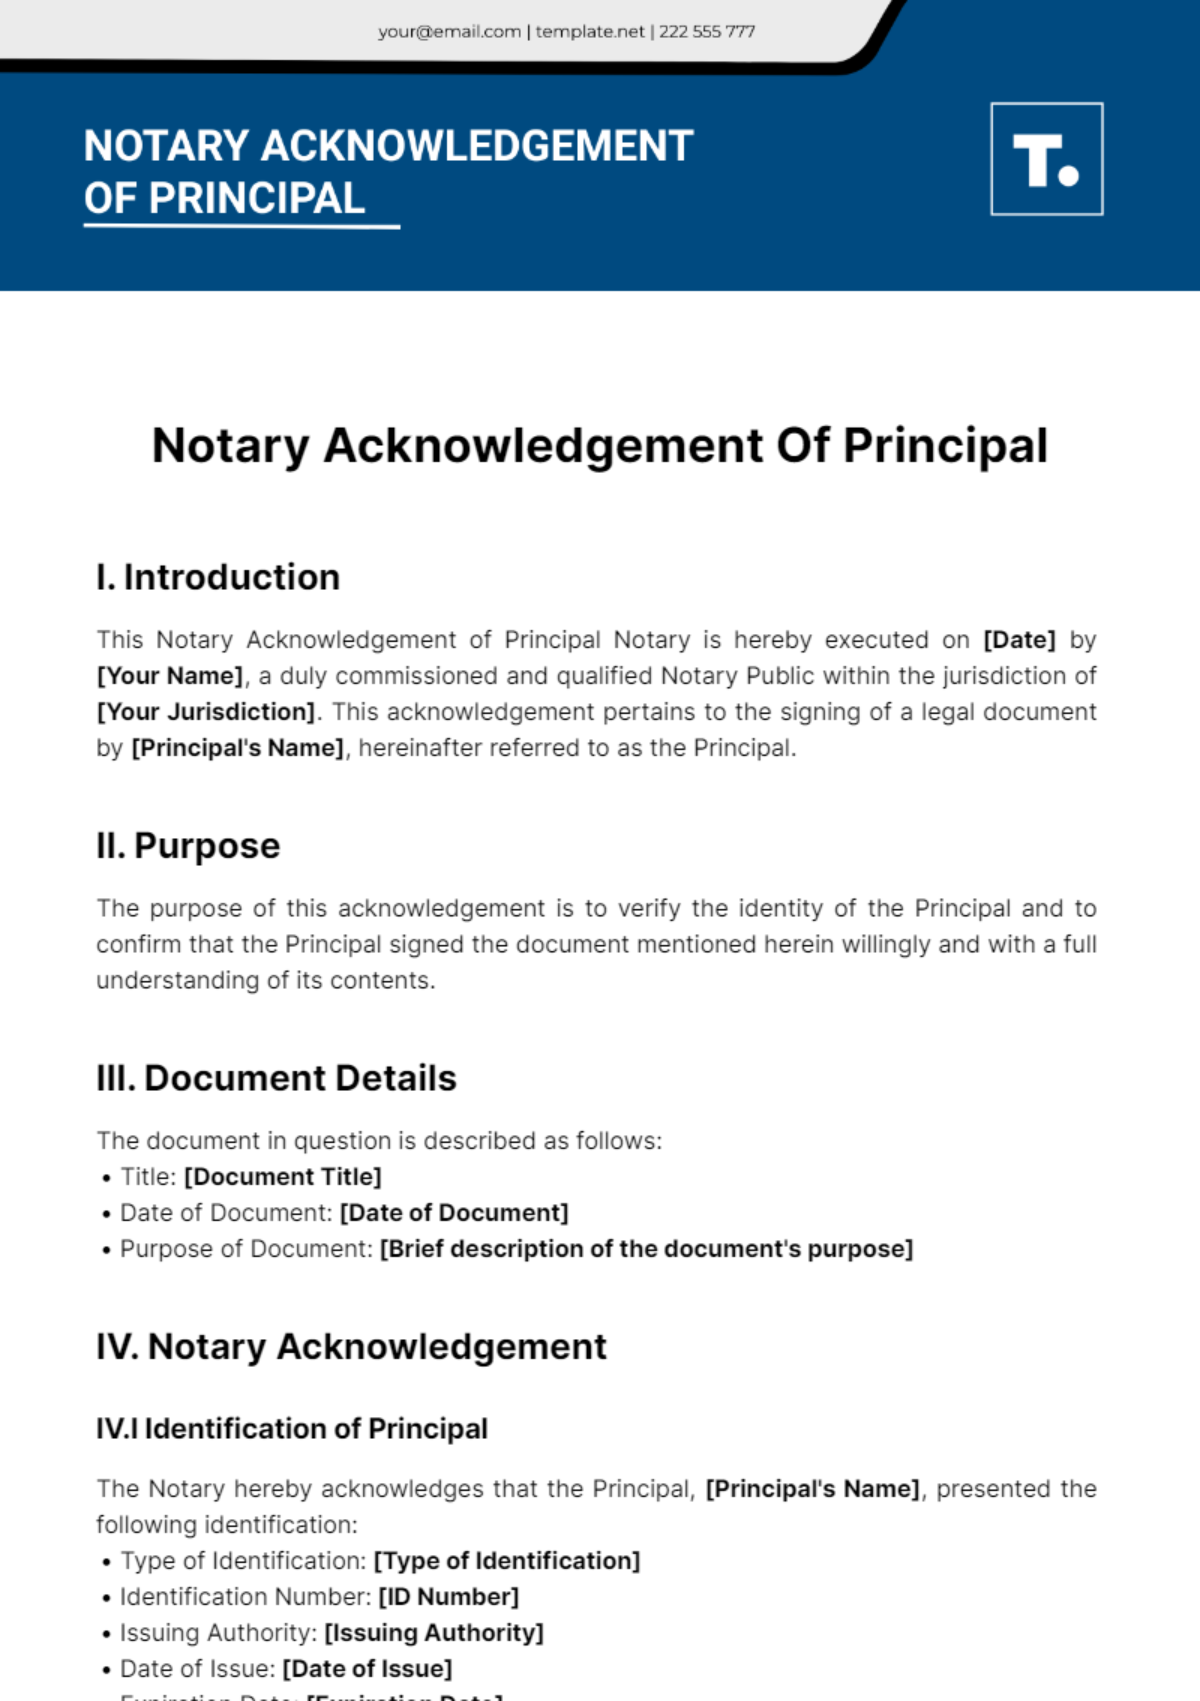 Notary Acknowledgement Of Principal Template